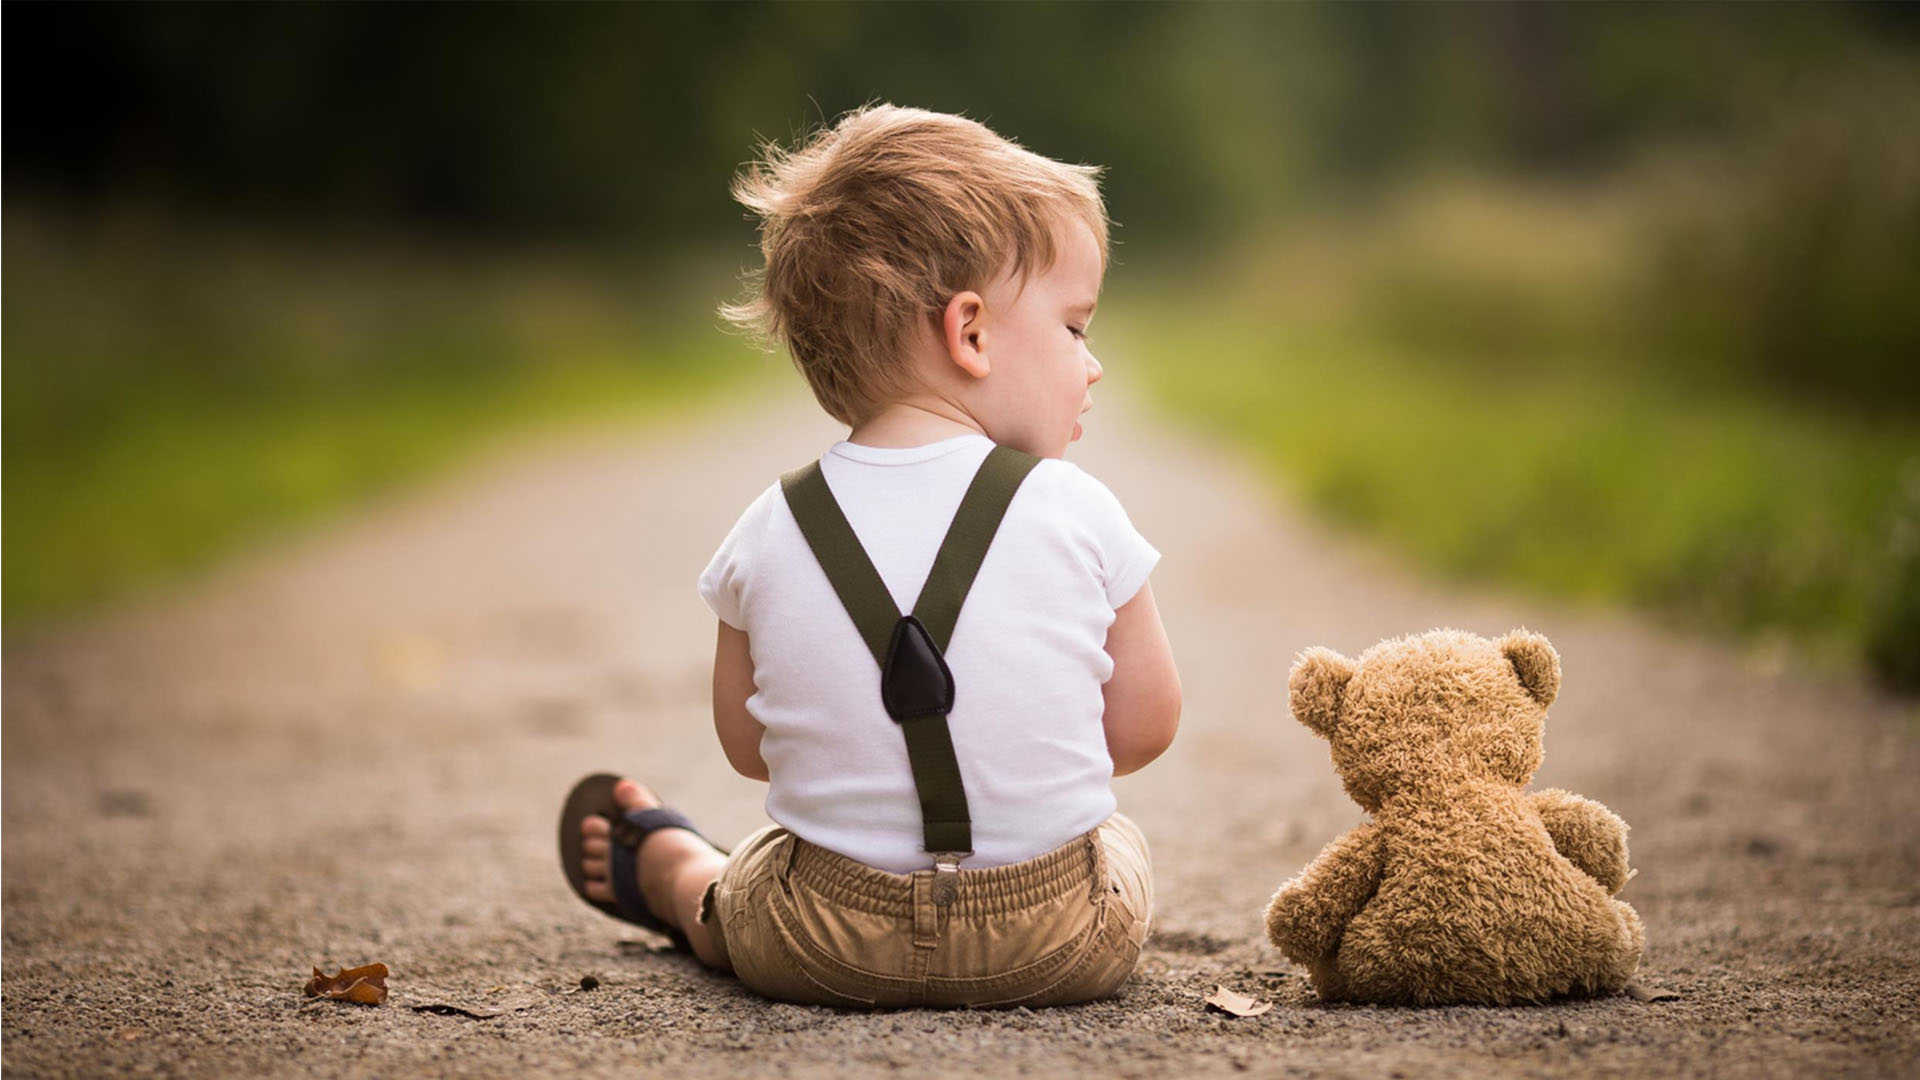 Cute Boy With Teddy bear Wallpaper. Beautiful image HD Picture